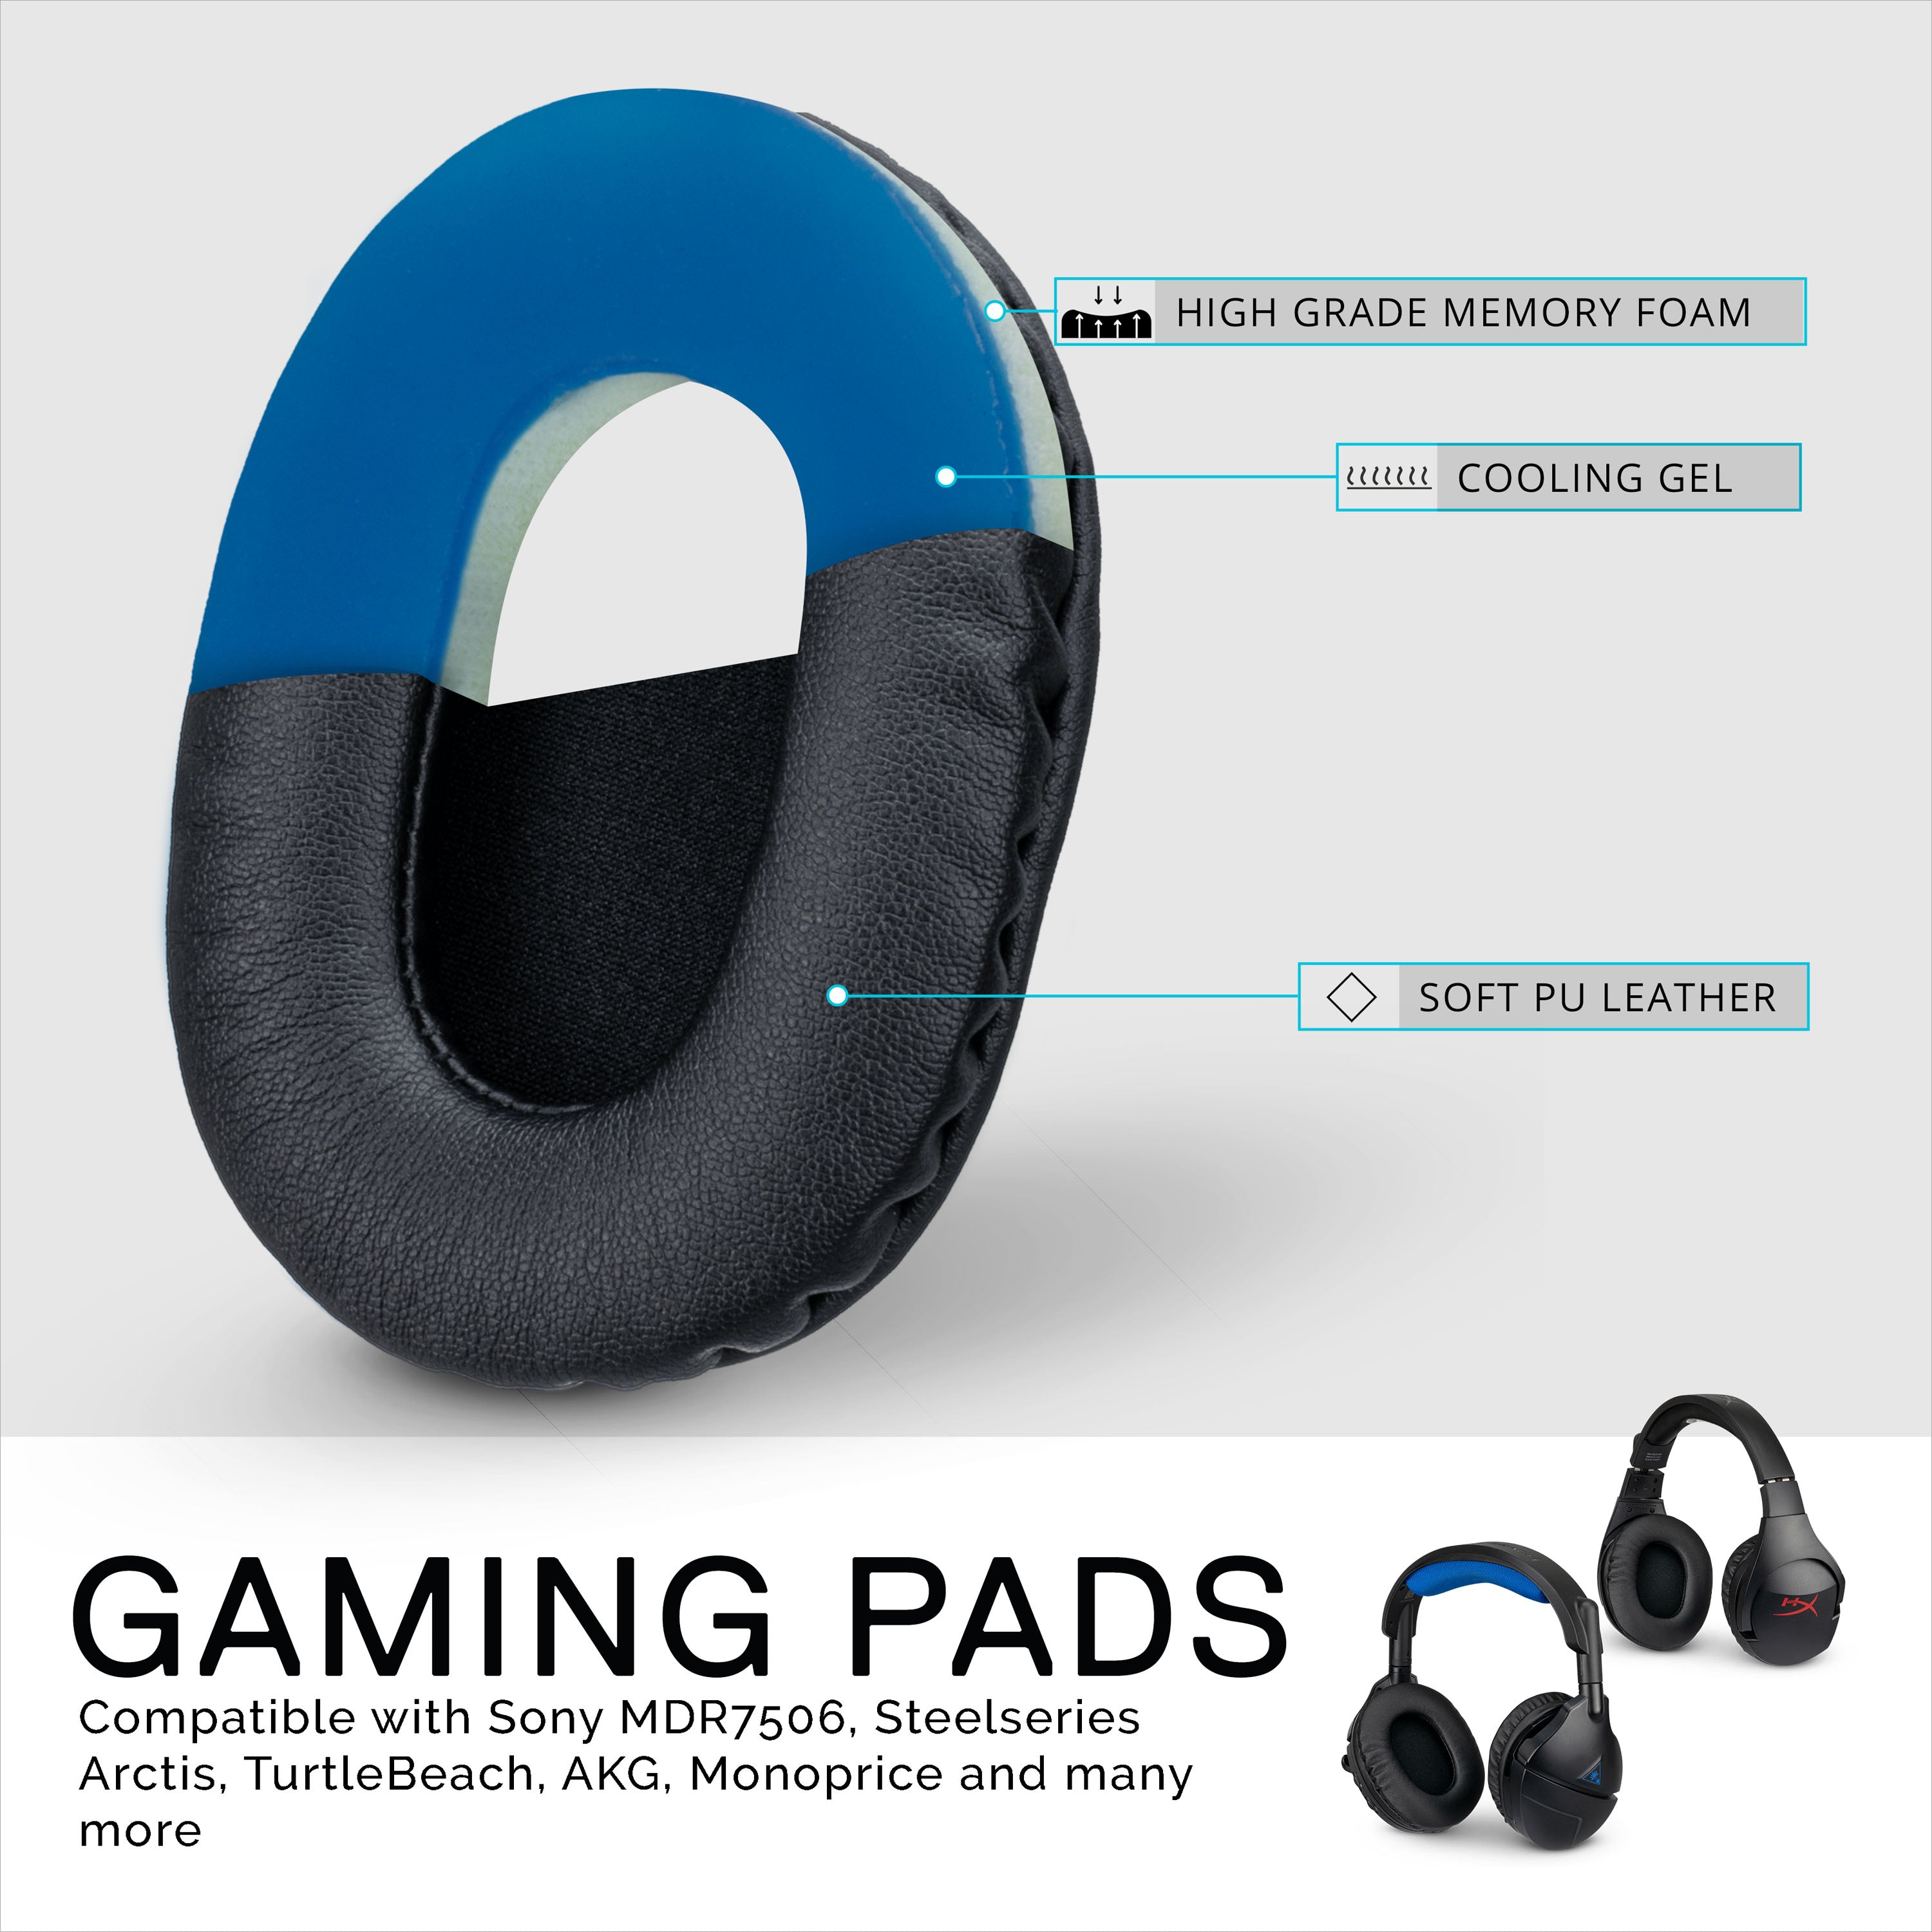 Steelseries Arctis Gaming Earpads with Cooling Gel & Soft PU Leather -  Custom Crafted Ear Pad Designed For Arctis 1, 3, 5, 7, 9, Pro & Prime -  Brainwavz Audio